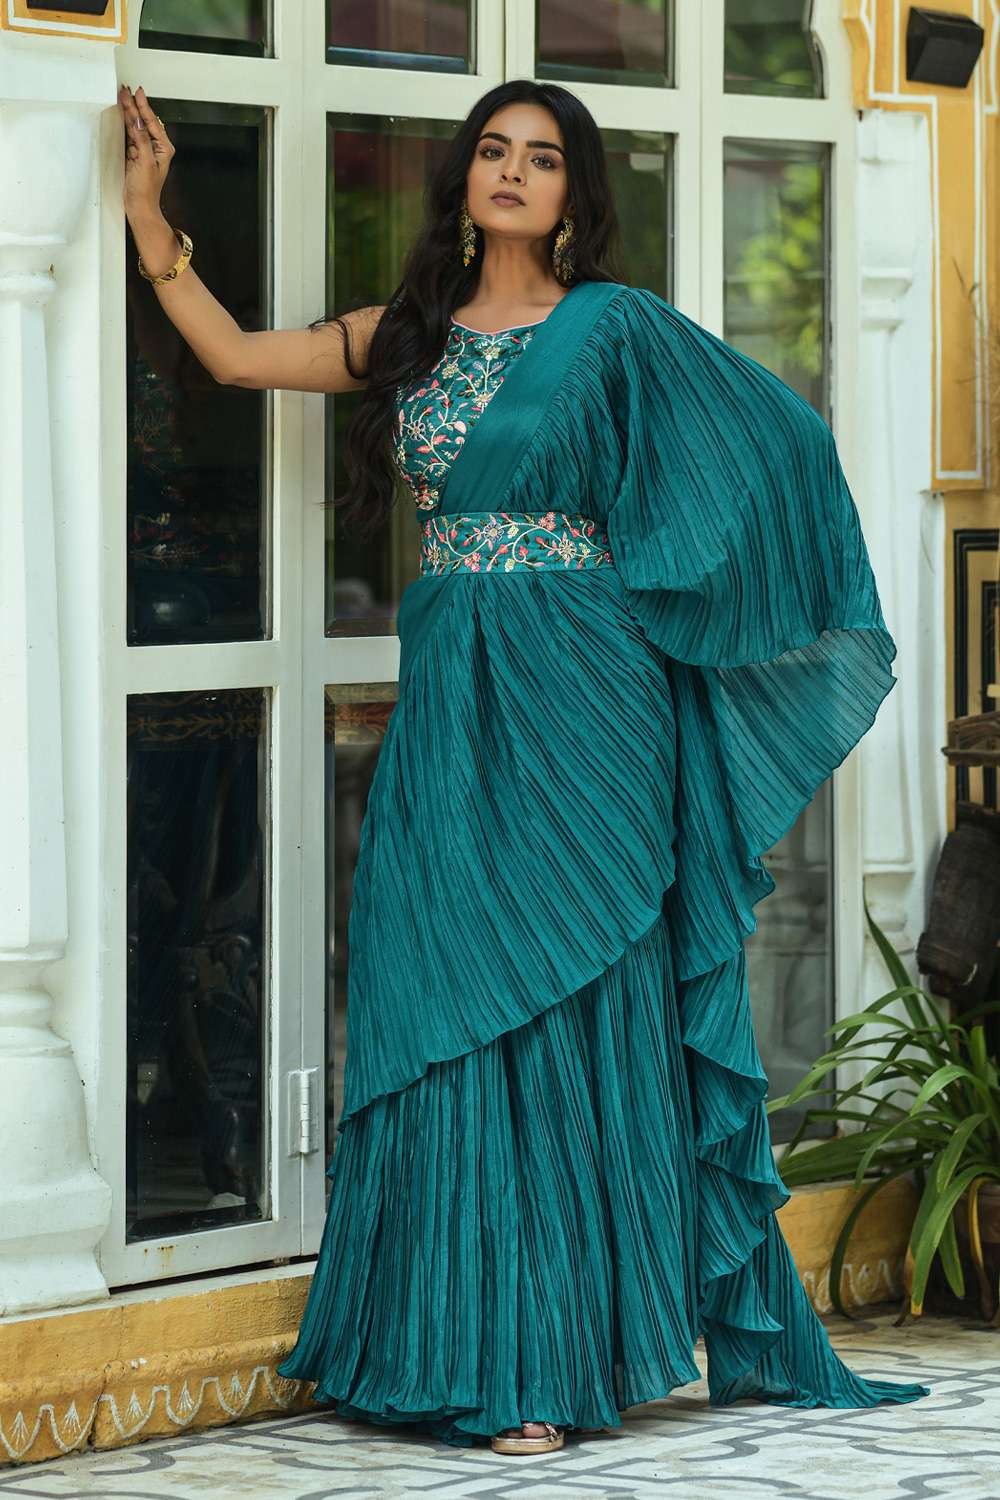 https://media.shopkund.com/media/catalog/product/cache/3/image/9df78eab33525d08d6e5fb8d27136e95/a/c/acu7621-4-teal-blue-embroidered-party-wear-saree-in-georgette-sr23295_2_.jpg